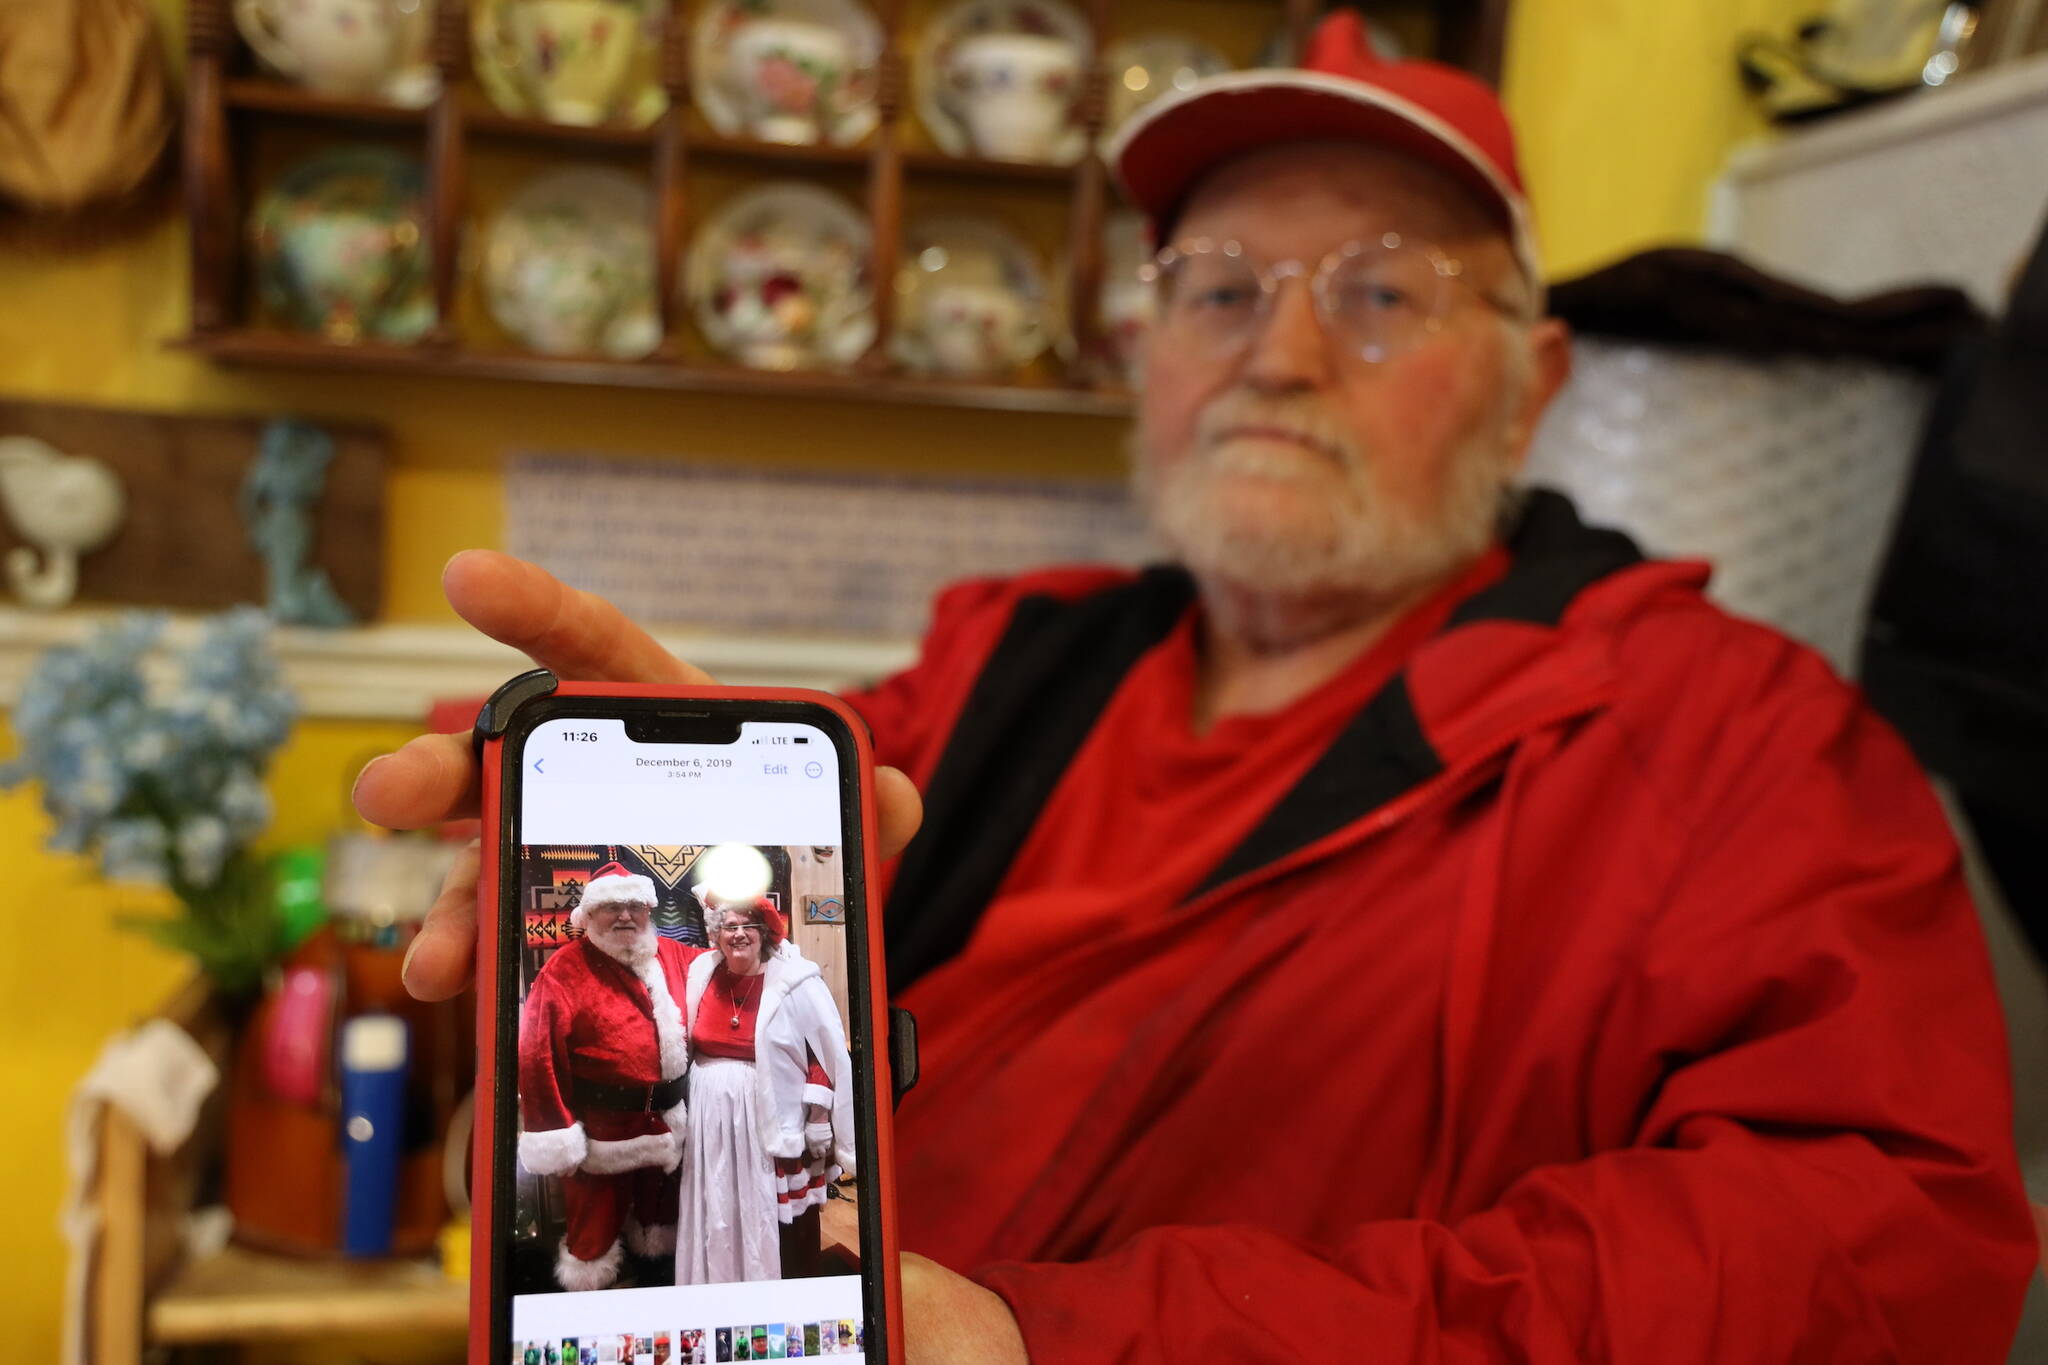 Clarise Larson / Juneau Empire 
Dale Hudson holds his phone showing a photo of him and his late wife, Suzanne, dressed up as Mr. and Mrs. Claus. Dale is in the process of liquidating his wife’s store, Nana’s Attic, after her recent death in late February.